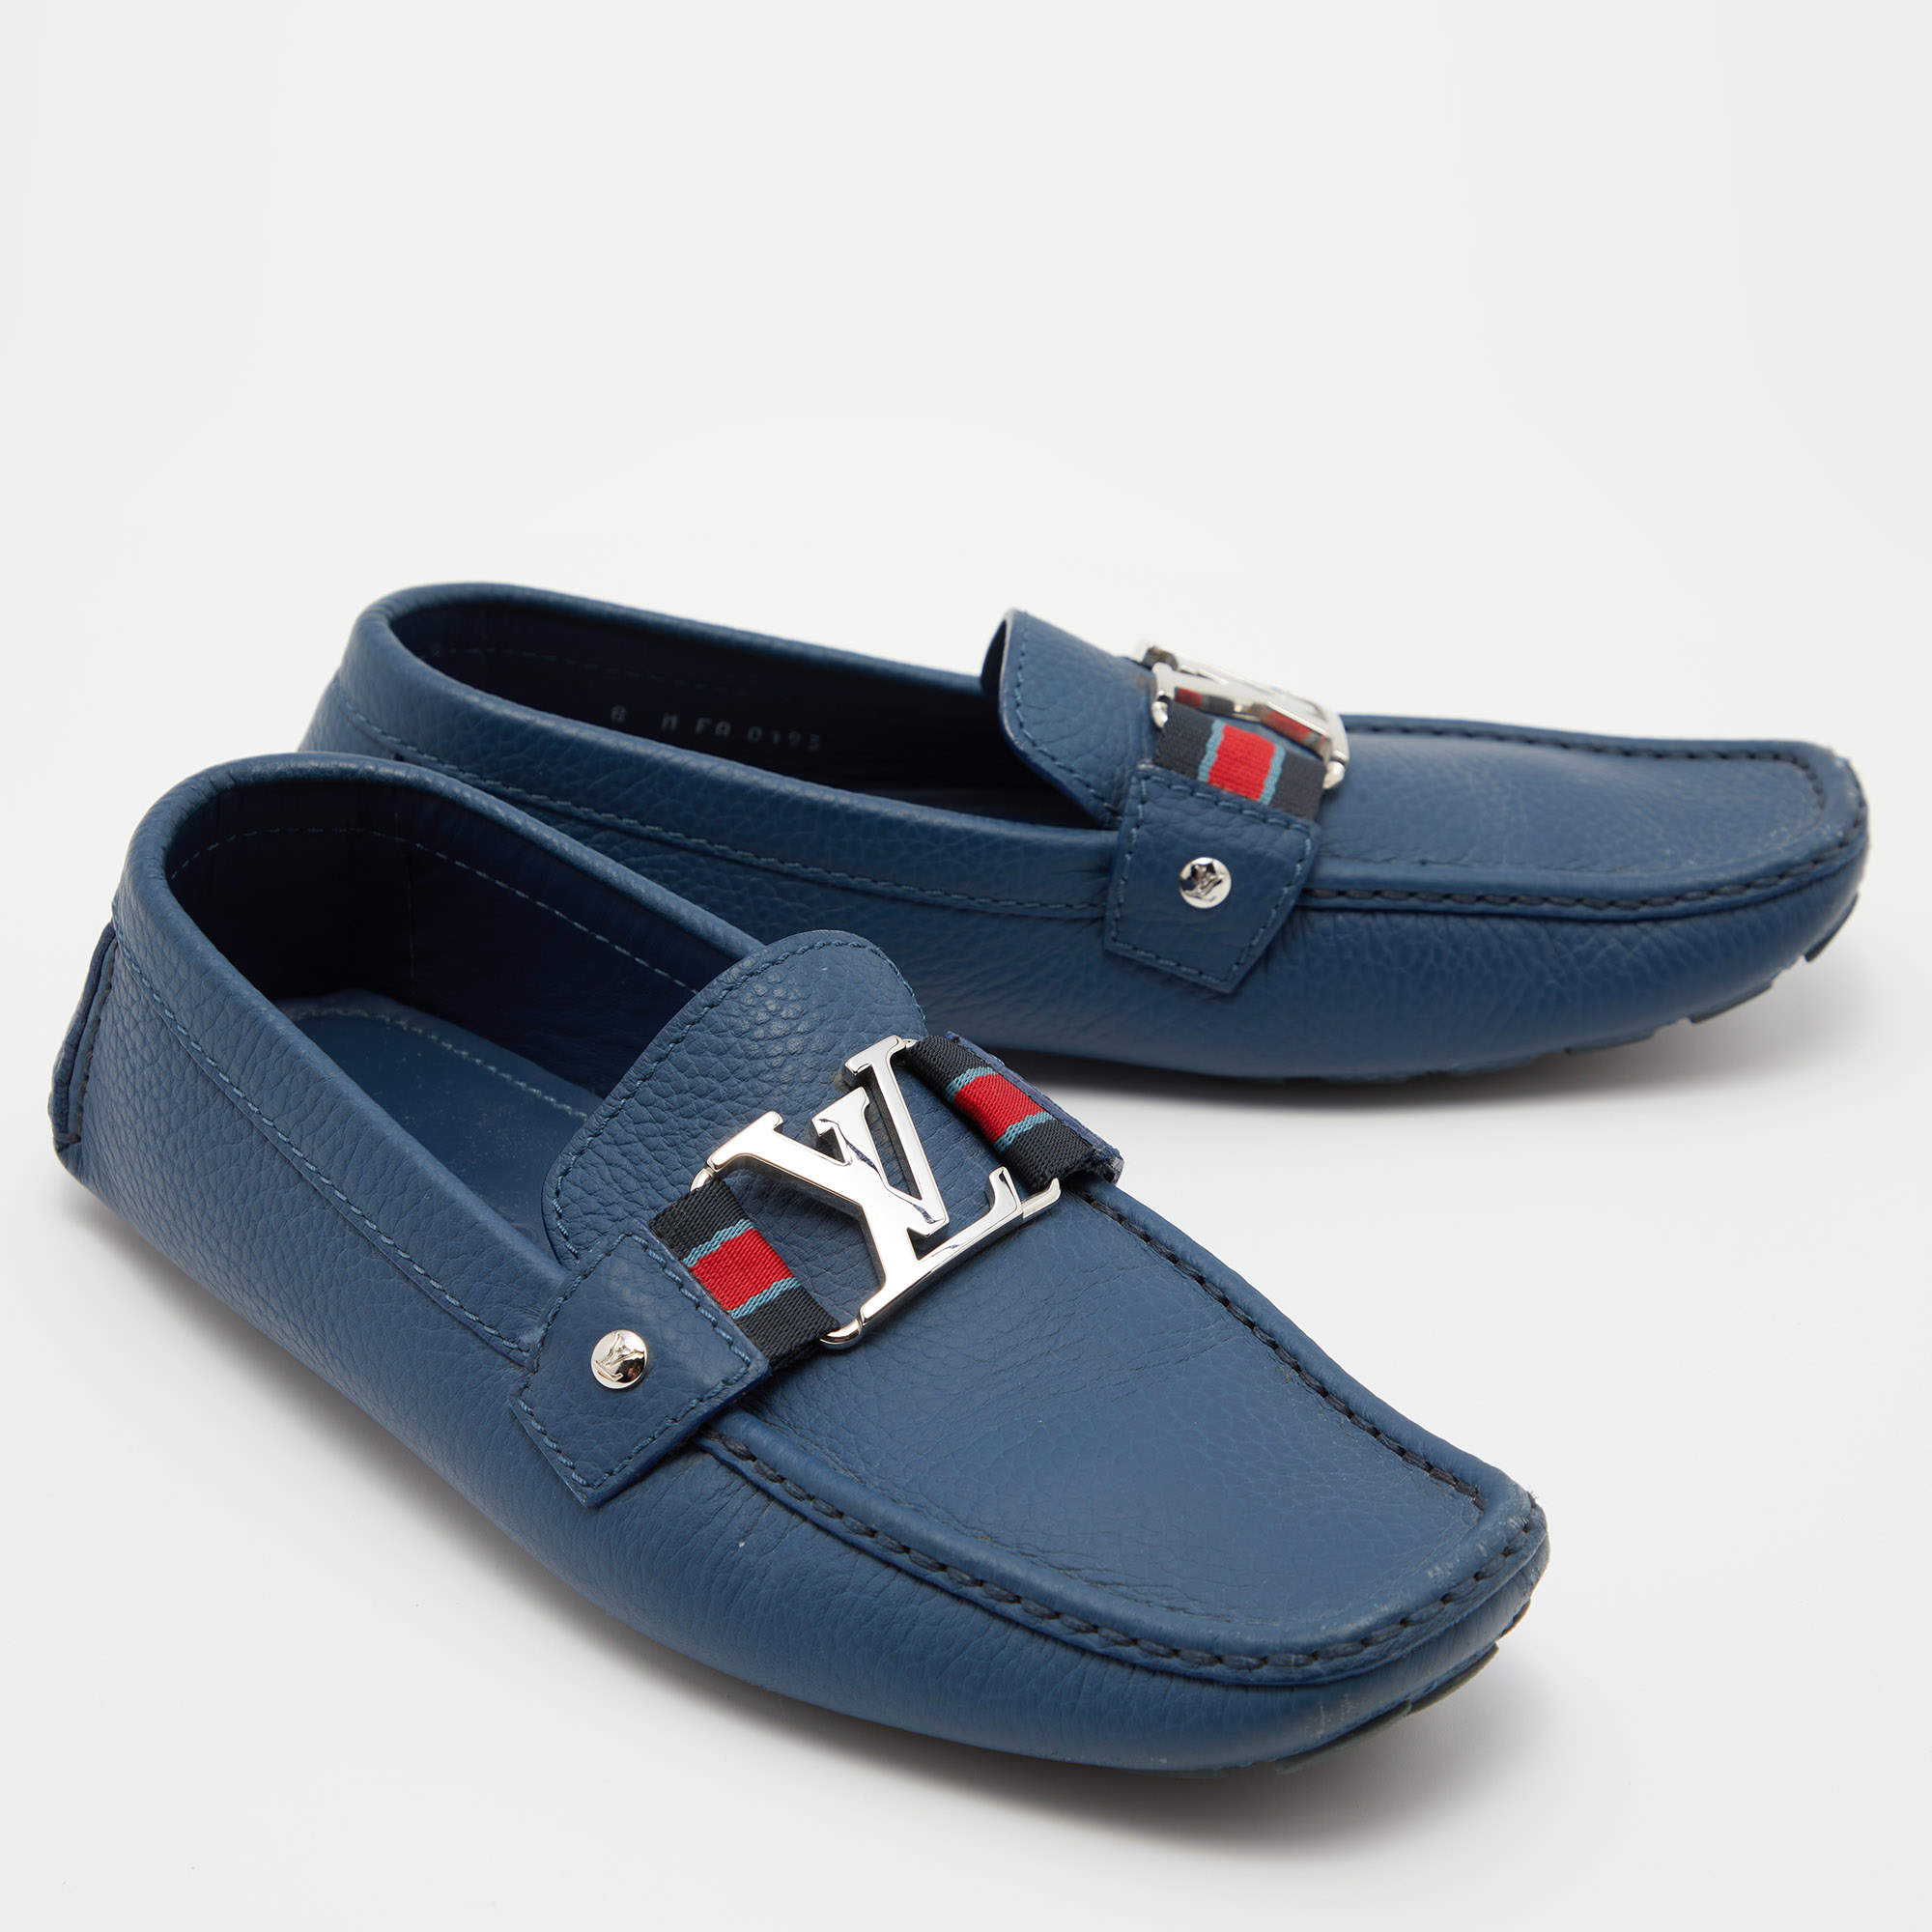 Louis Vuitton loafers, Model: Monte-Carlo Navy Blue, Cut 42, new